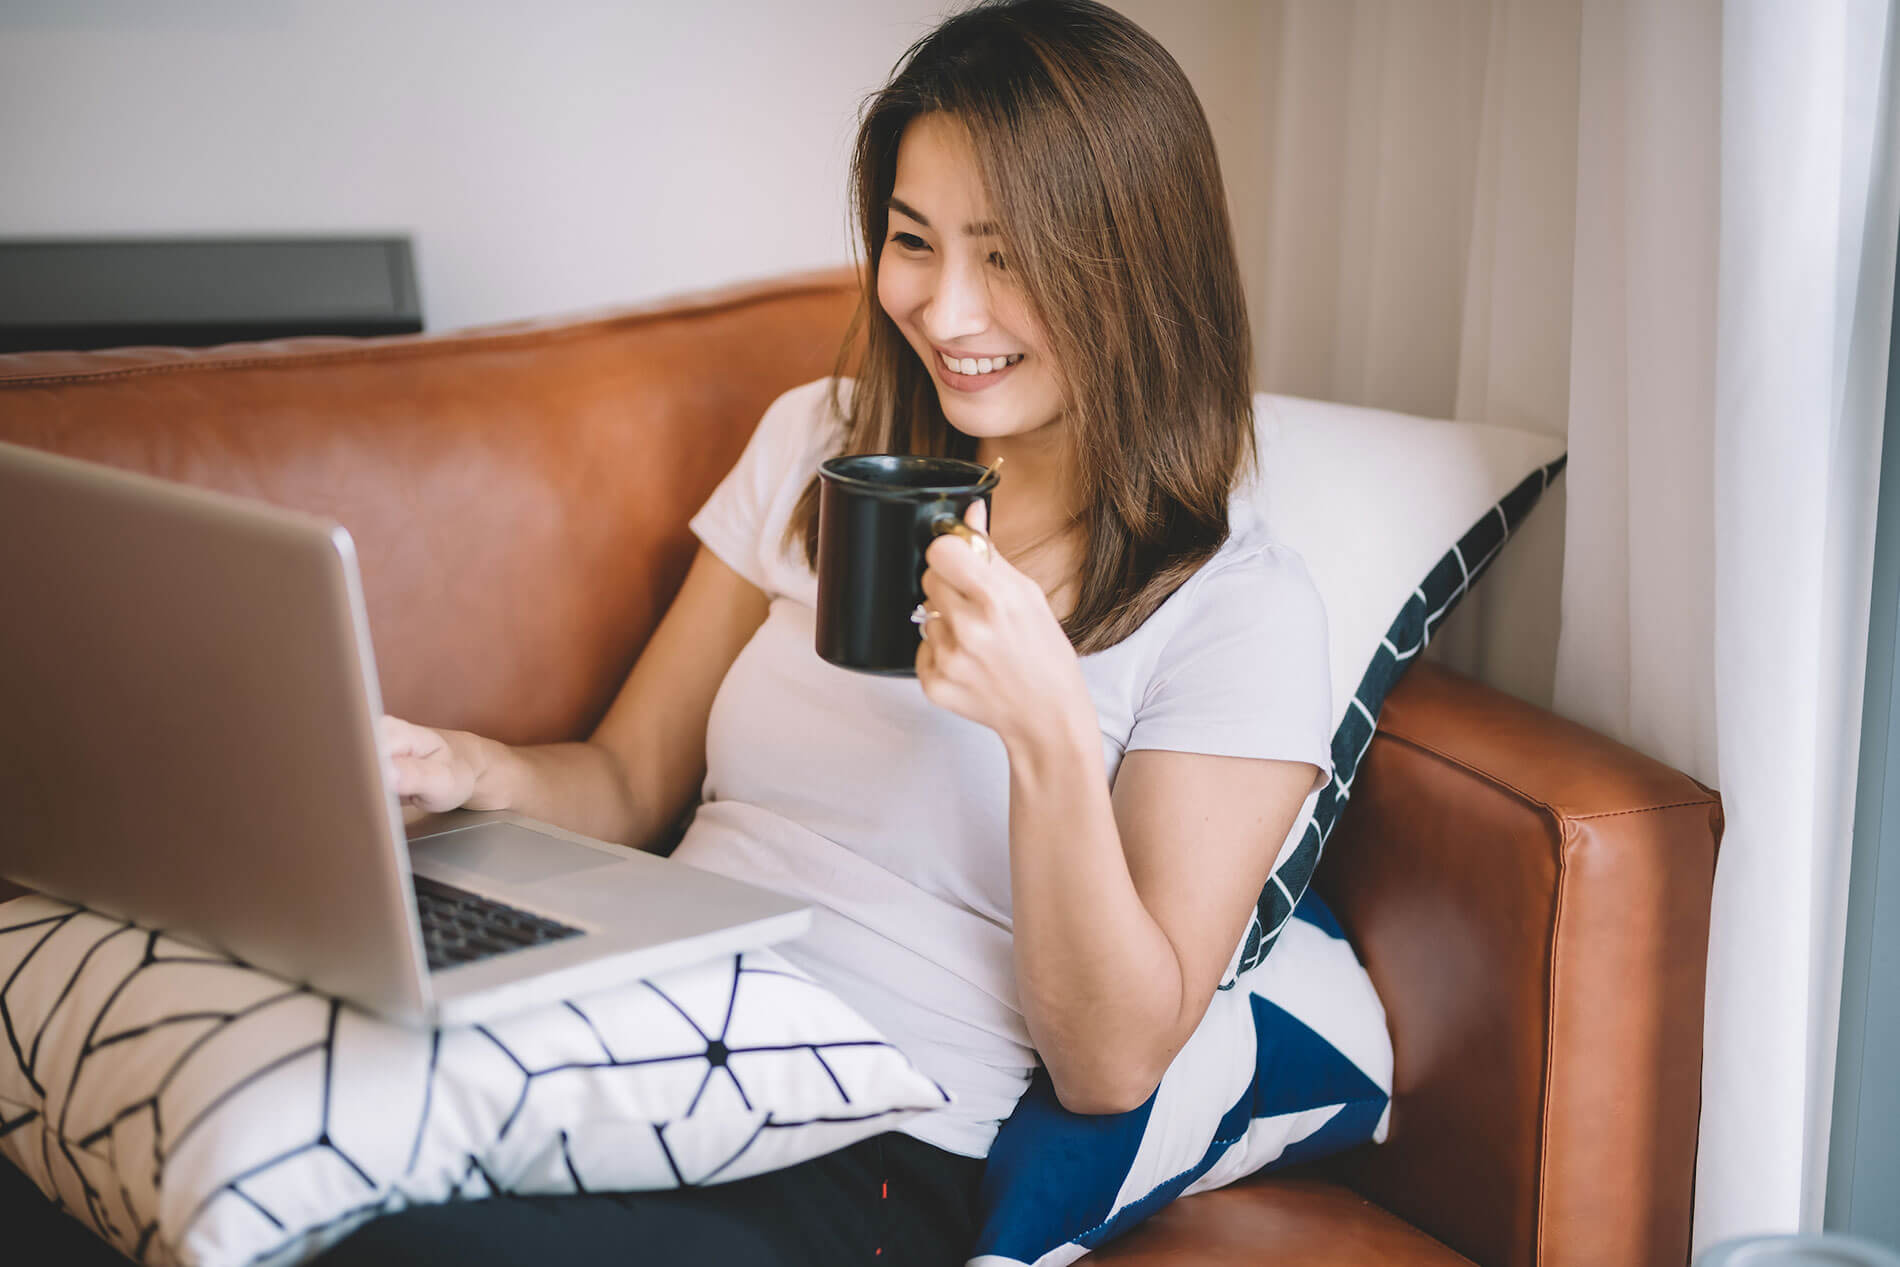 Woman sitting on couch with laptop and holding a cup of coffee